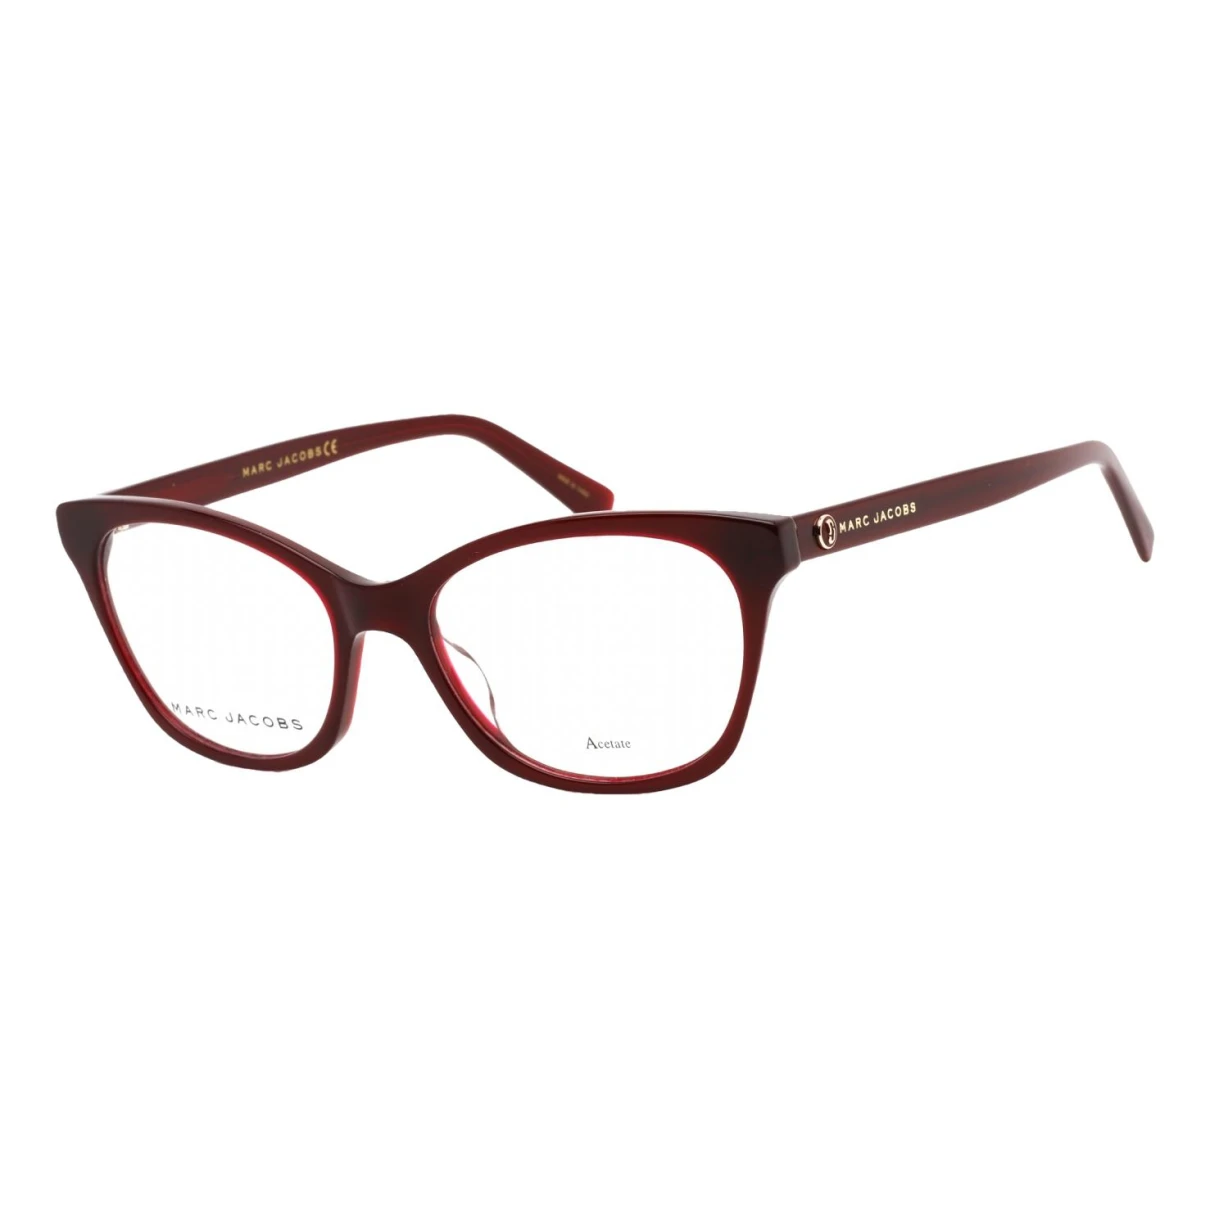 Pre-owned Marc Jacobs Sunglasses In Burgundy